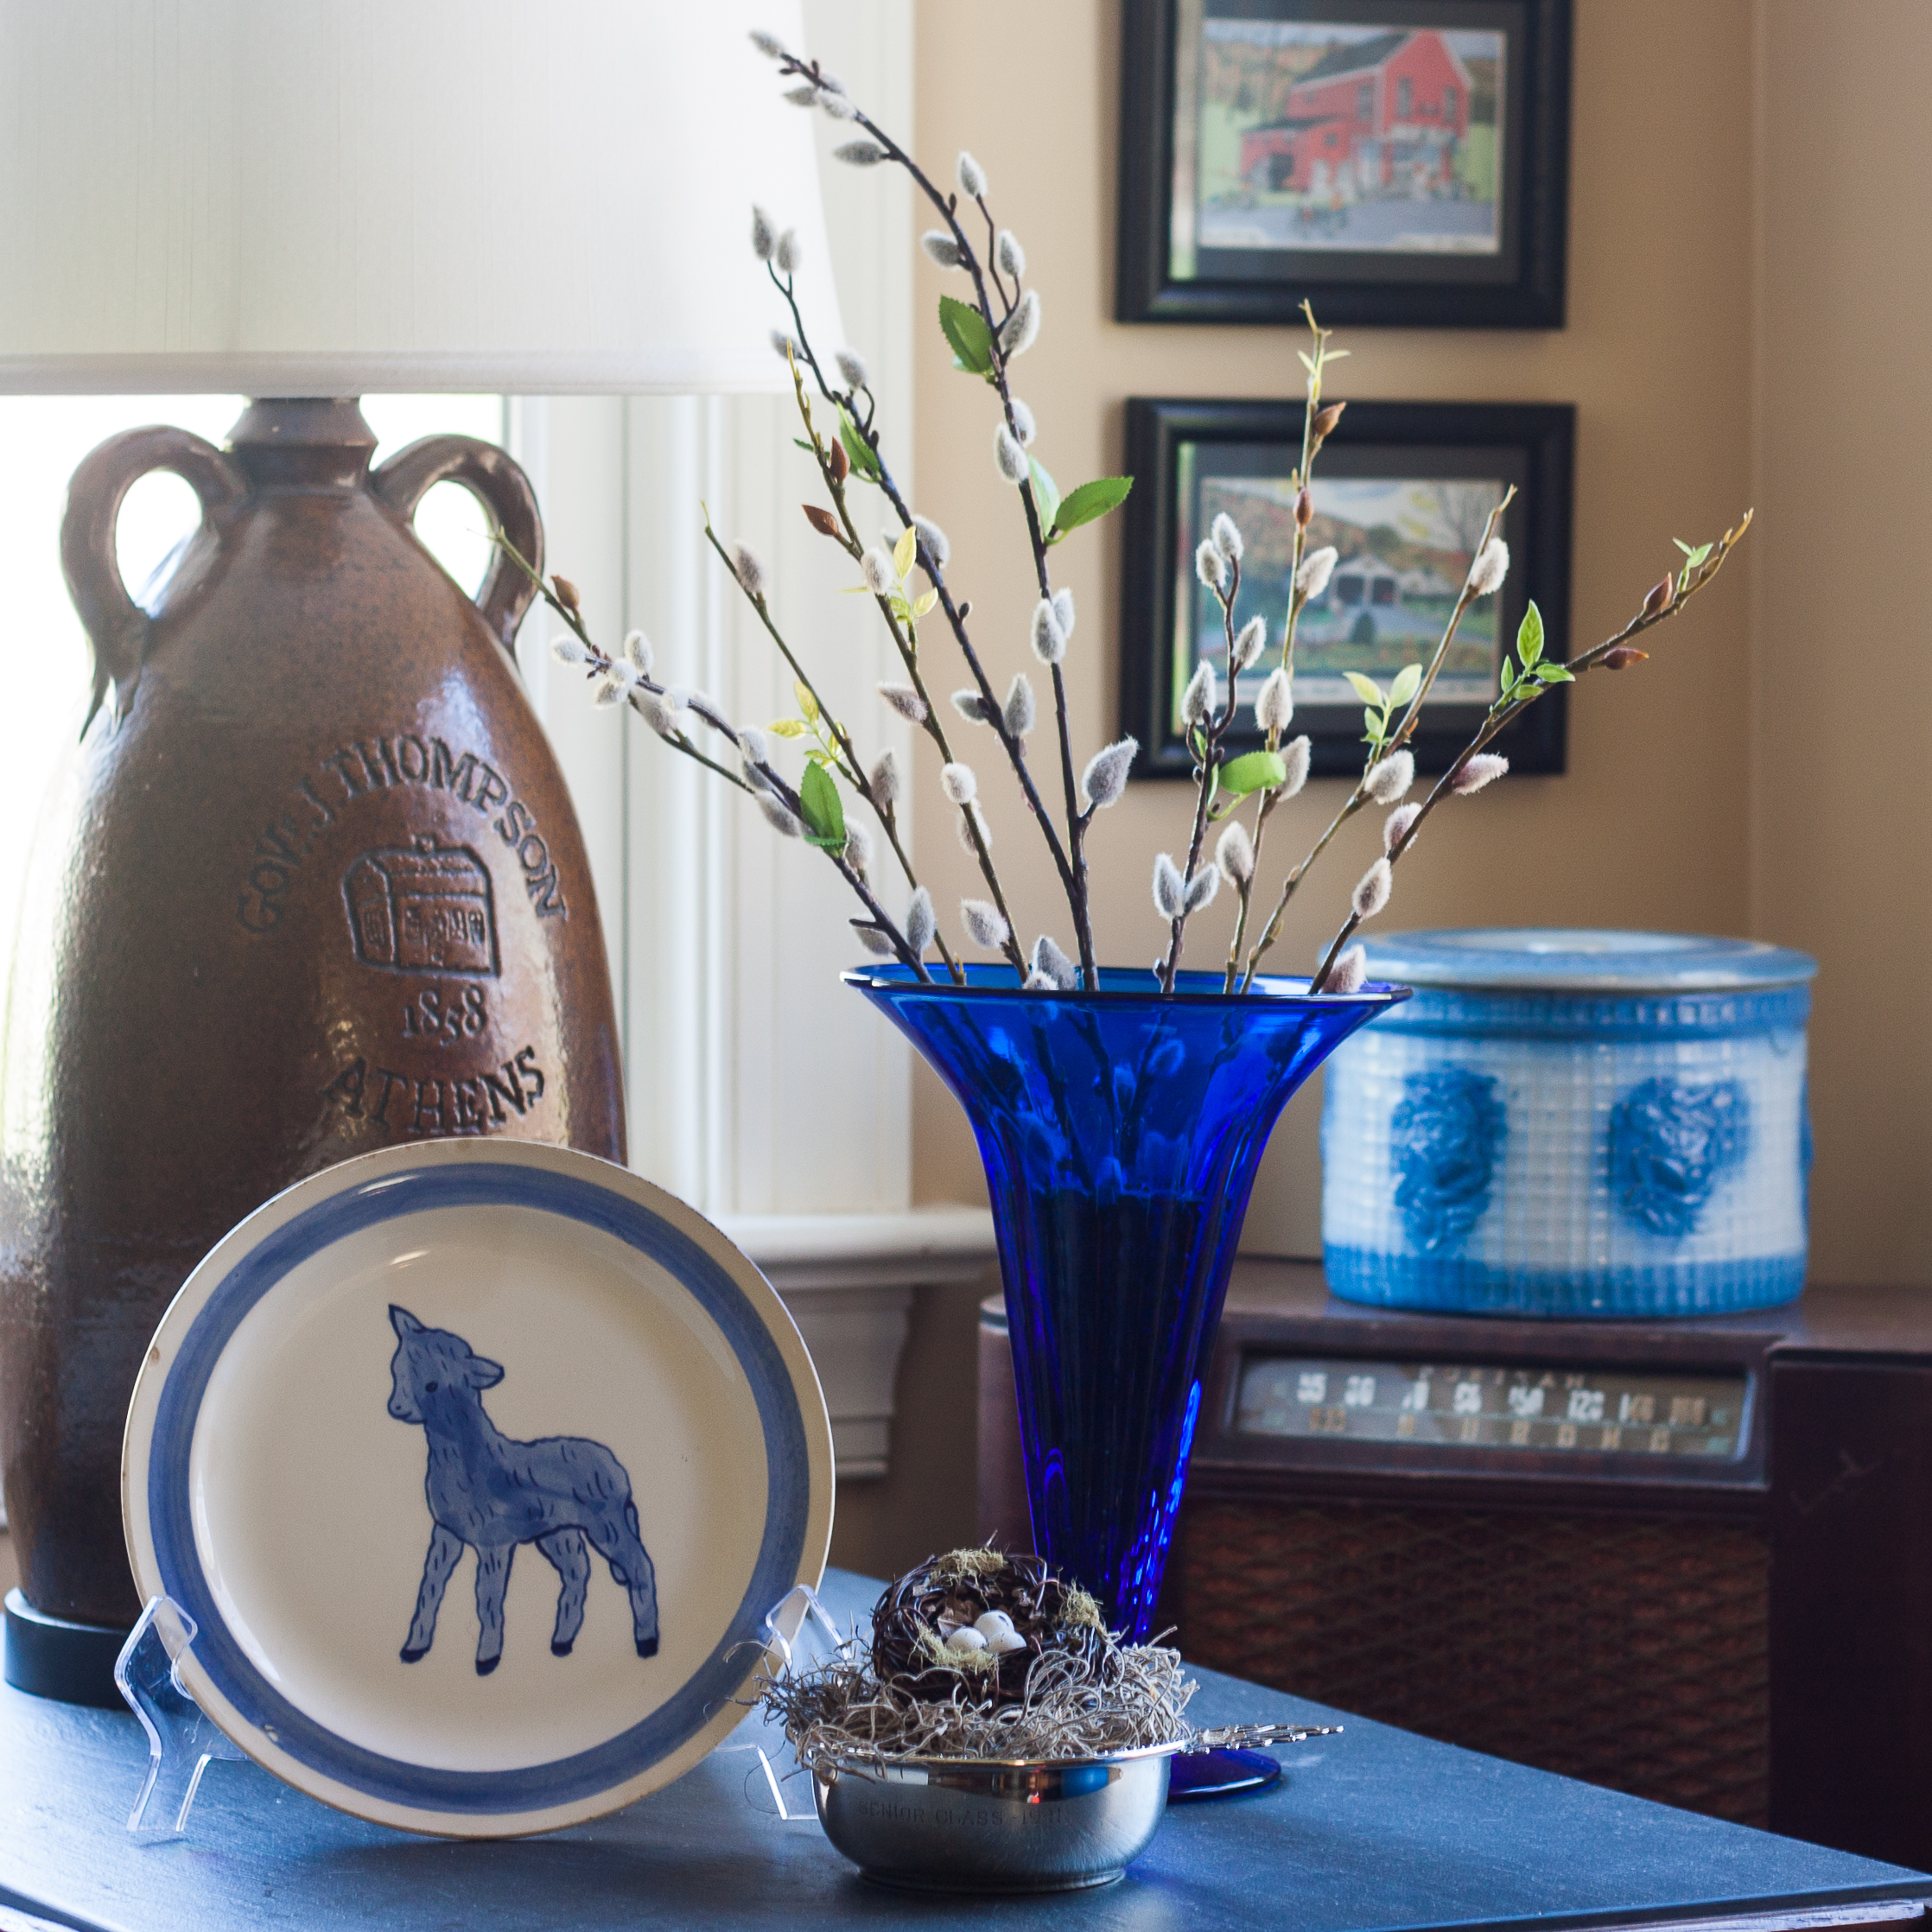 Easter vignette with a Blue Ridge Pottery lamb plate, Blenko blue vase, and a silver child's porridge bowl with a nest.